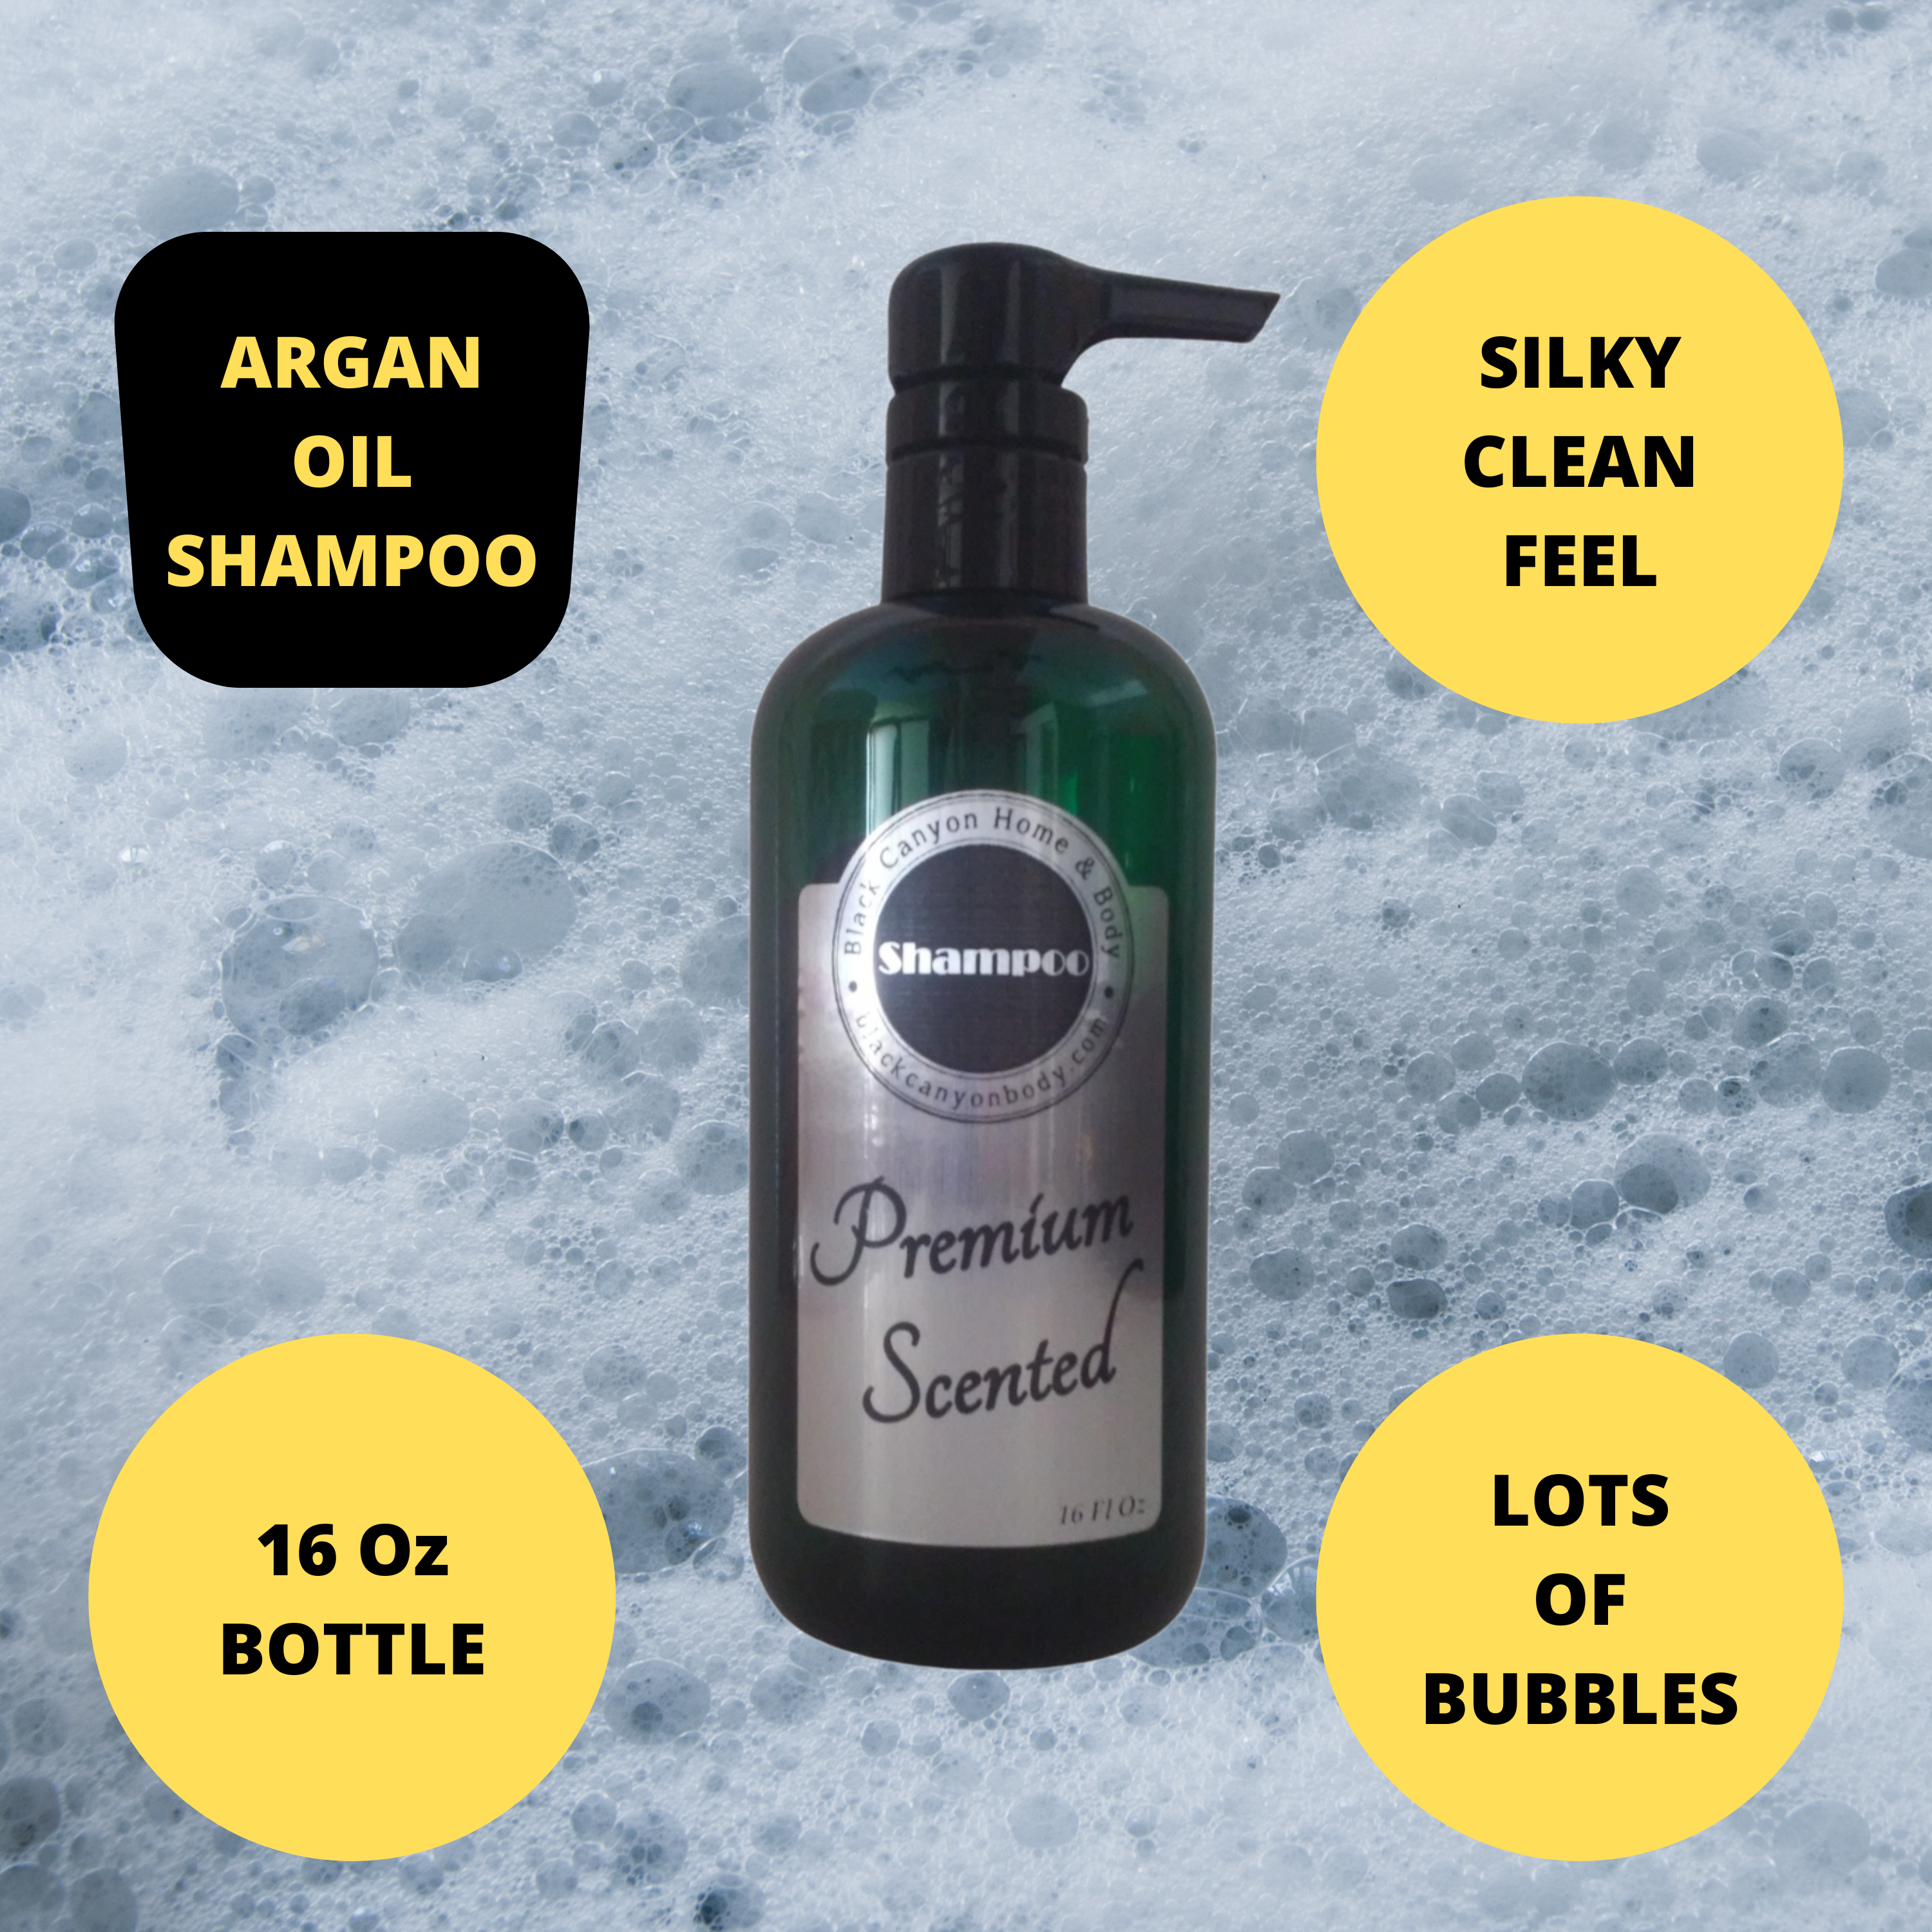 Black Canyon April Showers Scented Shampoo with Argan Oil